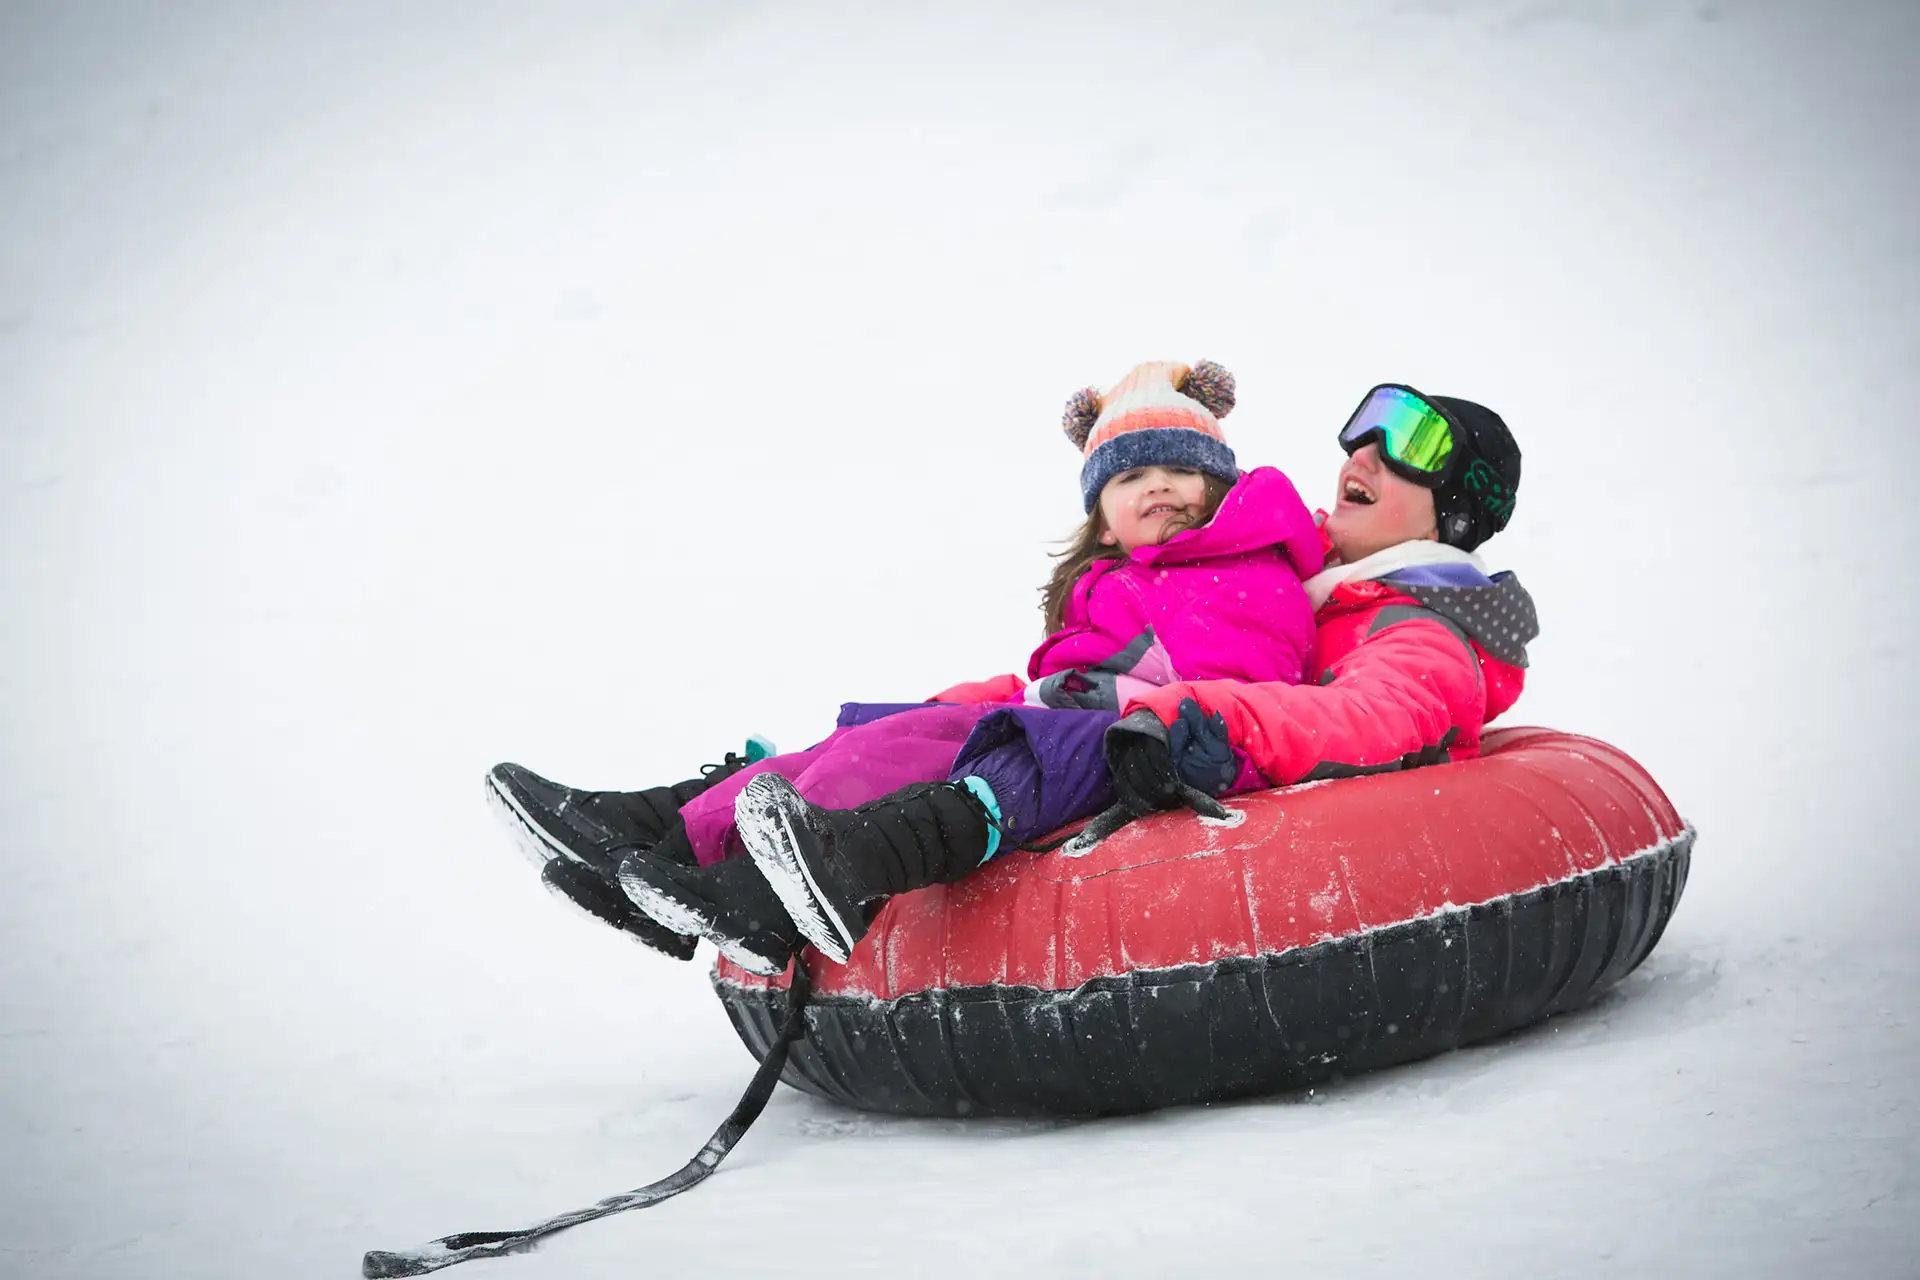 Snow Tubing at Woodloch Pines in the Poconos; Courtesy of Woodloch Pines